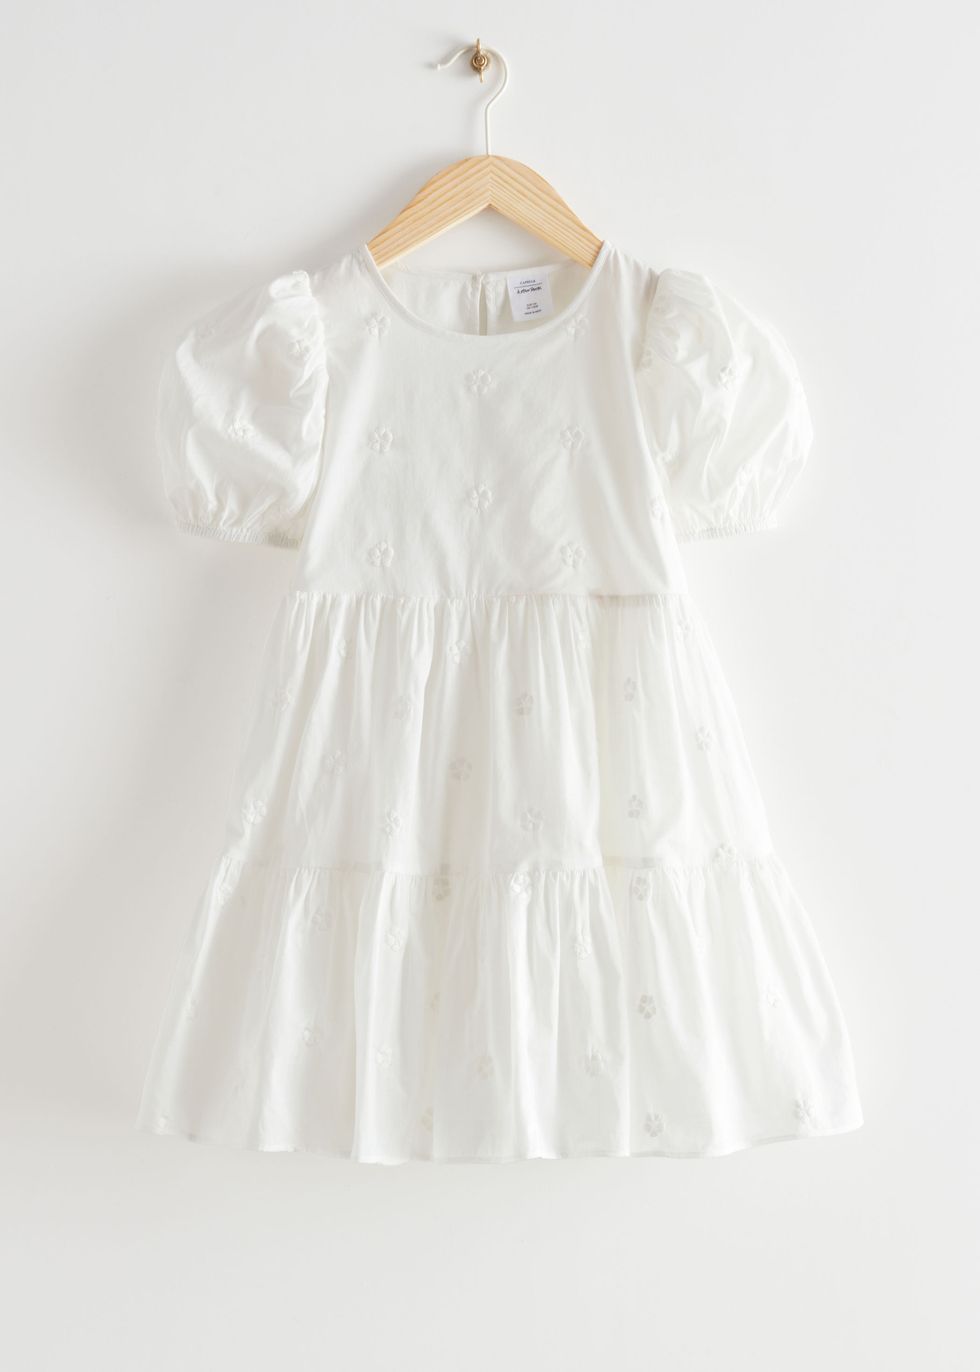 & Other Stories' kids collection - matching Mini Me clothing